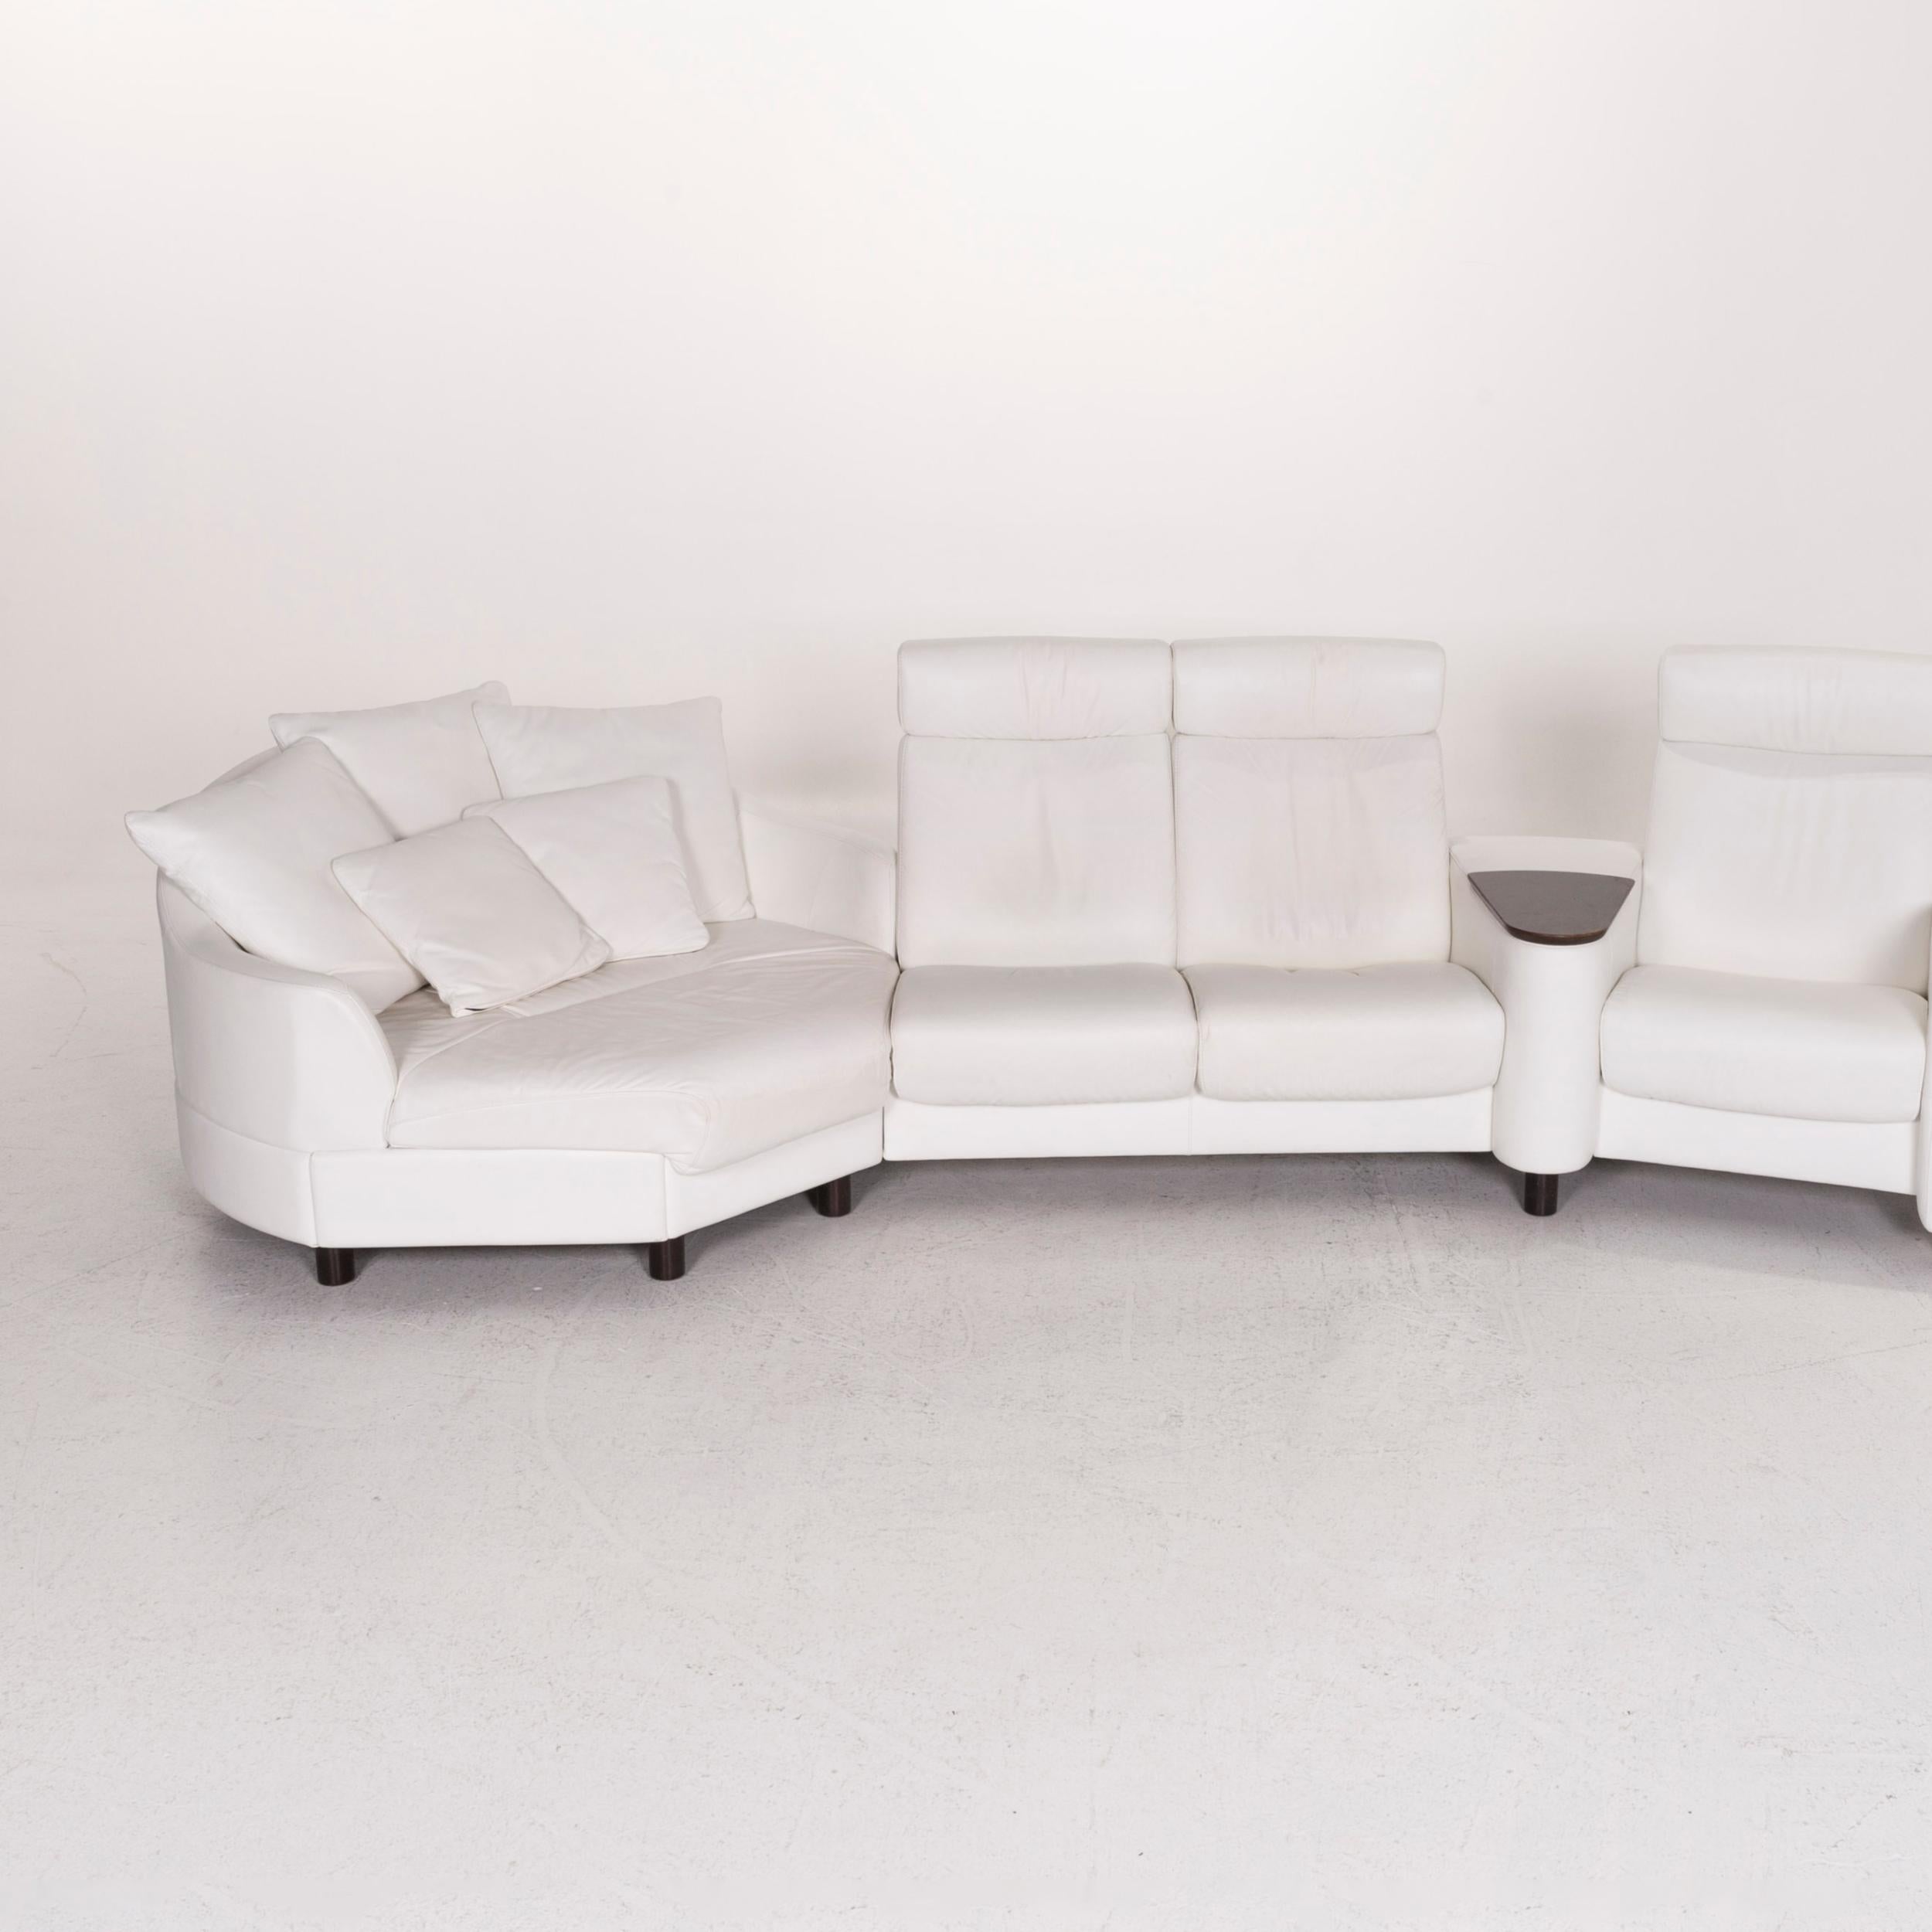 Stressless Arion Leather Corner Sofa White Function Couch 1